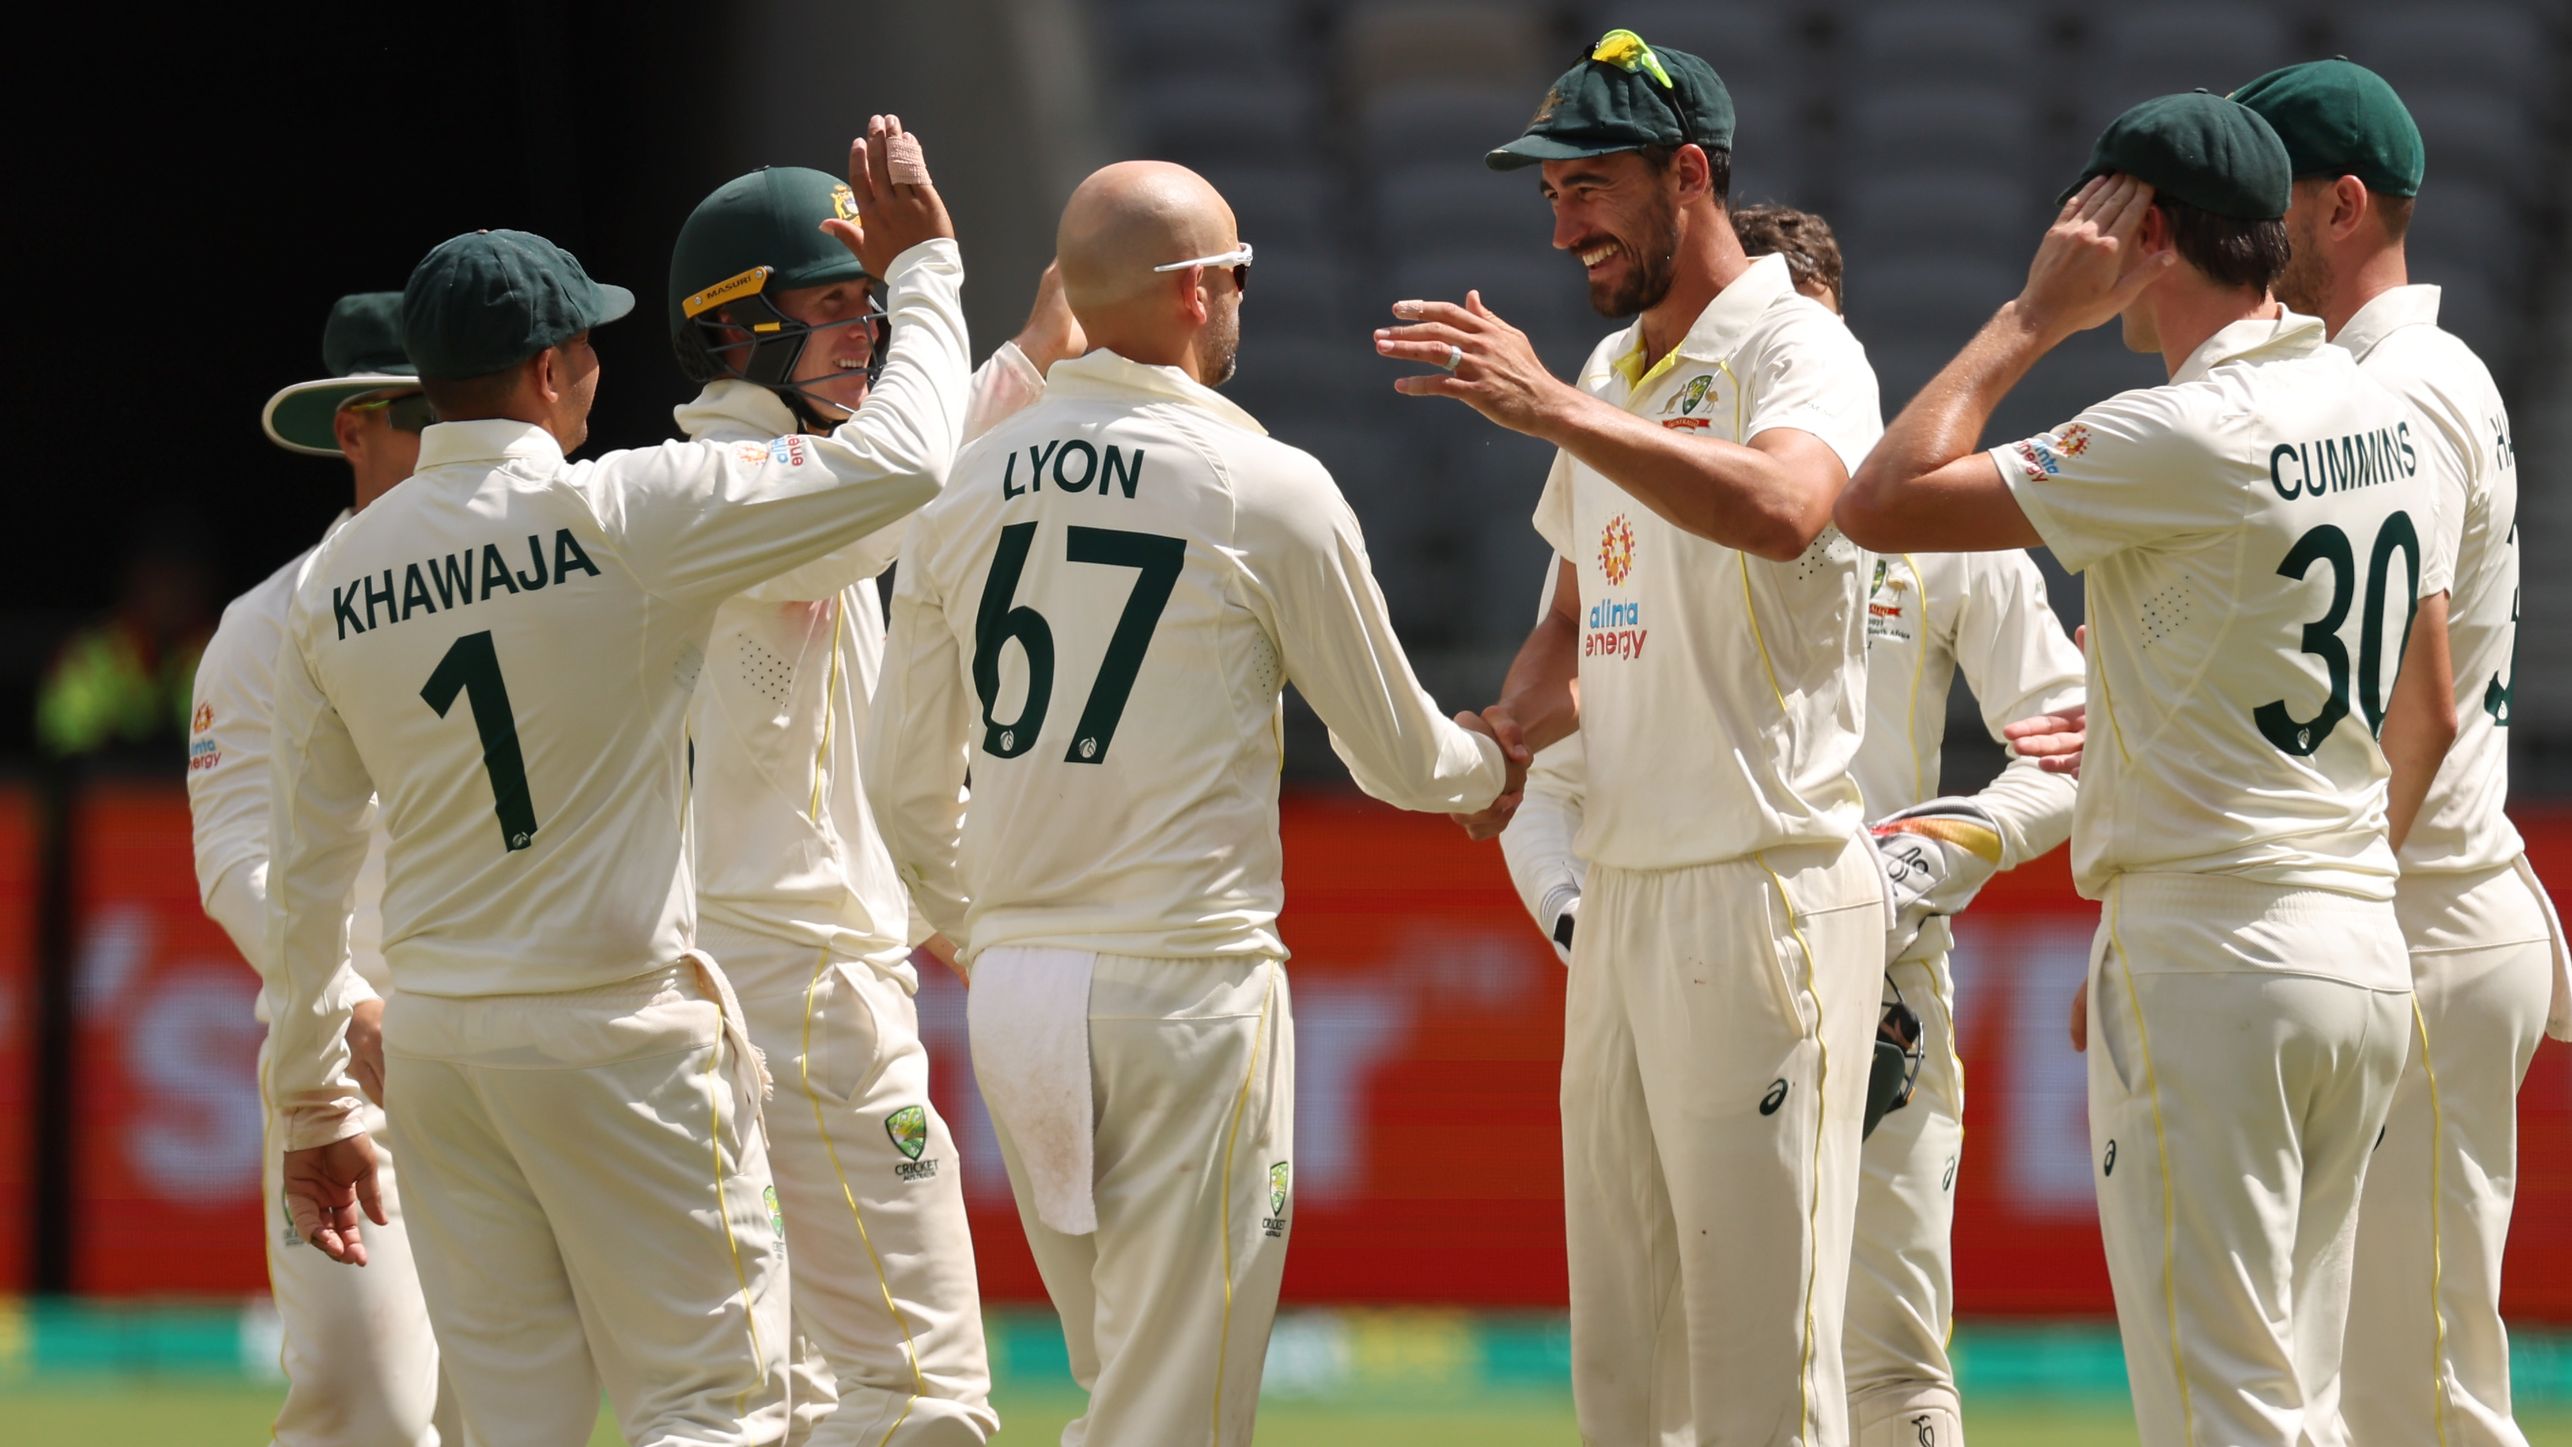 Nathan Lyon of Australia celebrates after taking the wicket of Roston Chase of the West Indies. (Photo by Cameron Spencer/Getty Images)